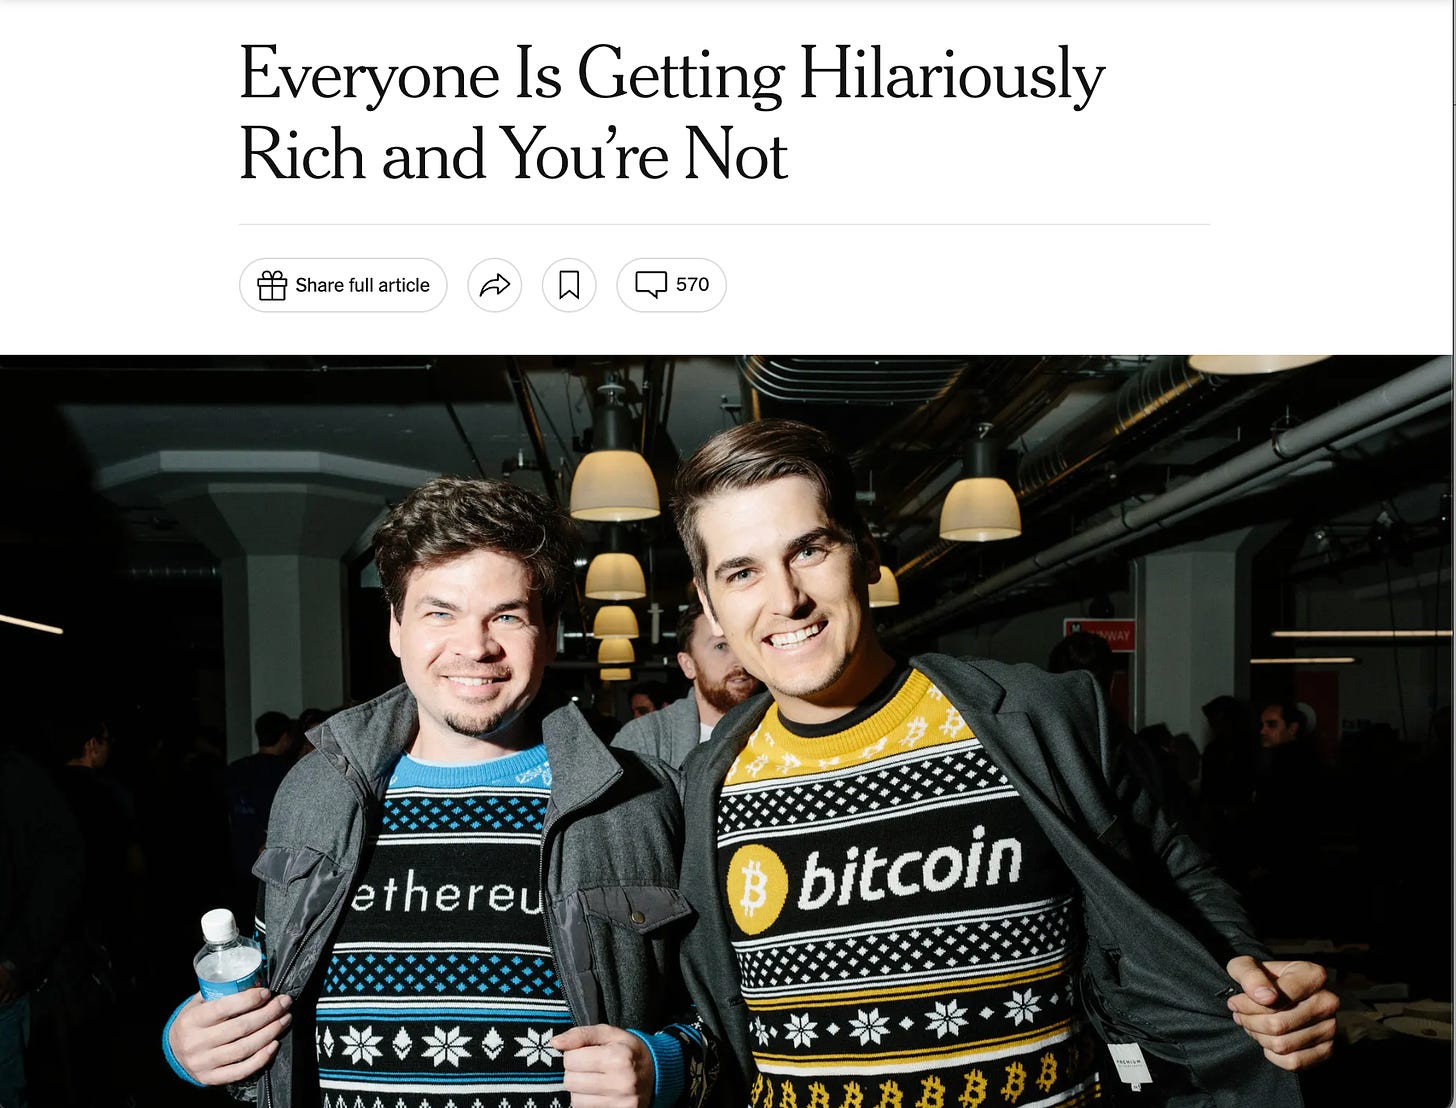 A New York Times headline "Everyone Is Getting Hilariously Rich and You're Not." The photo features two seemingly white men holding their jackets open to reveal ethereum and bitcoin sweaters.